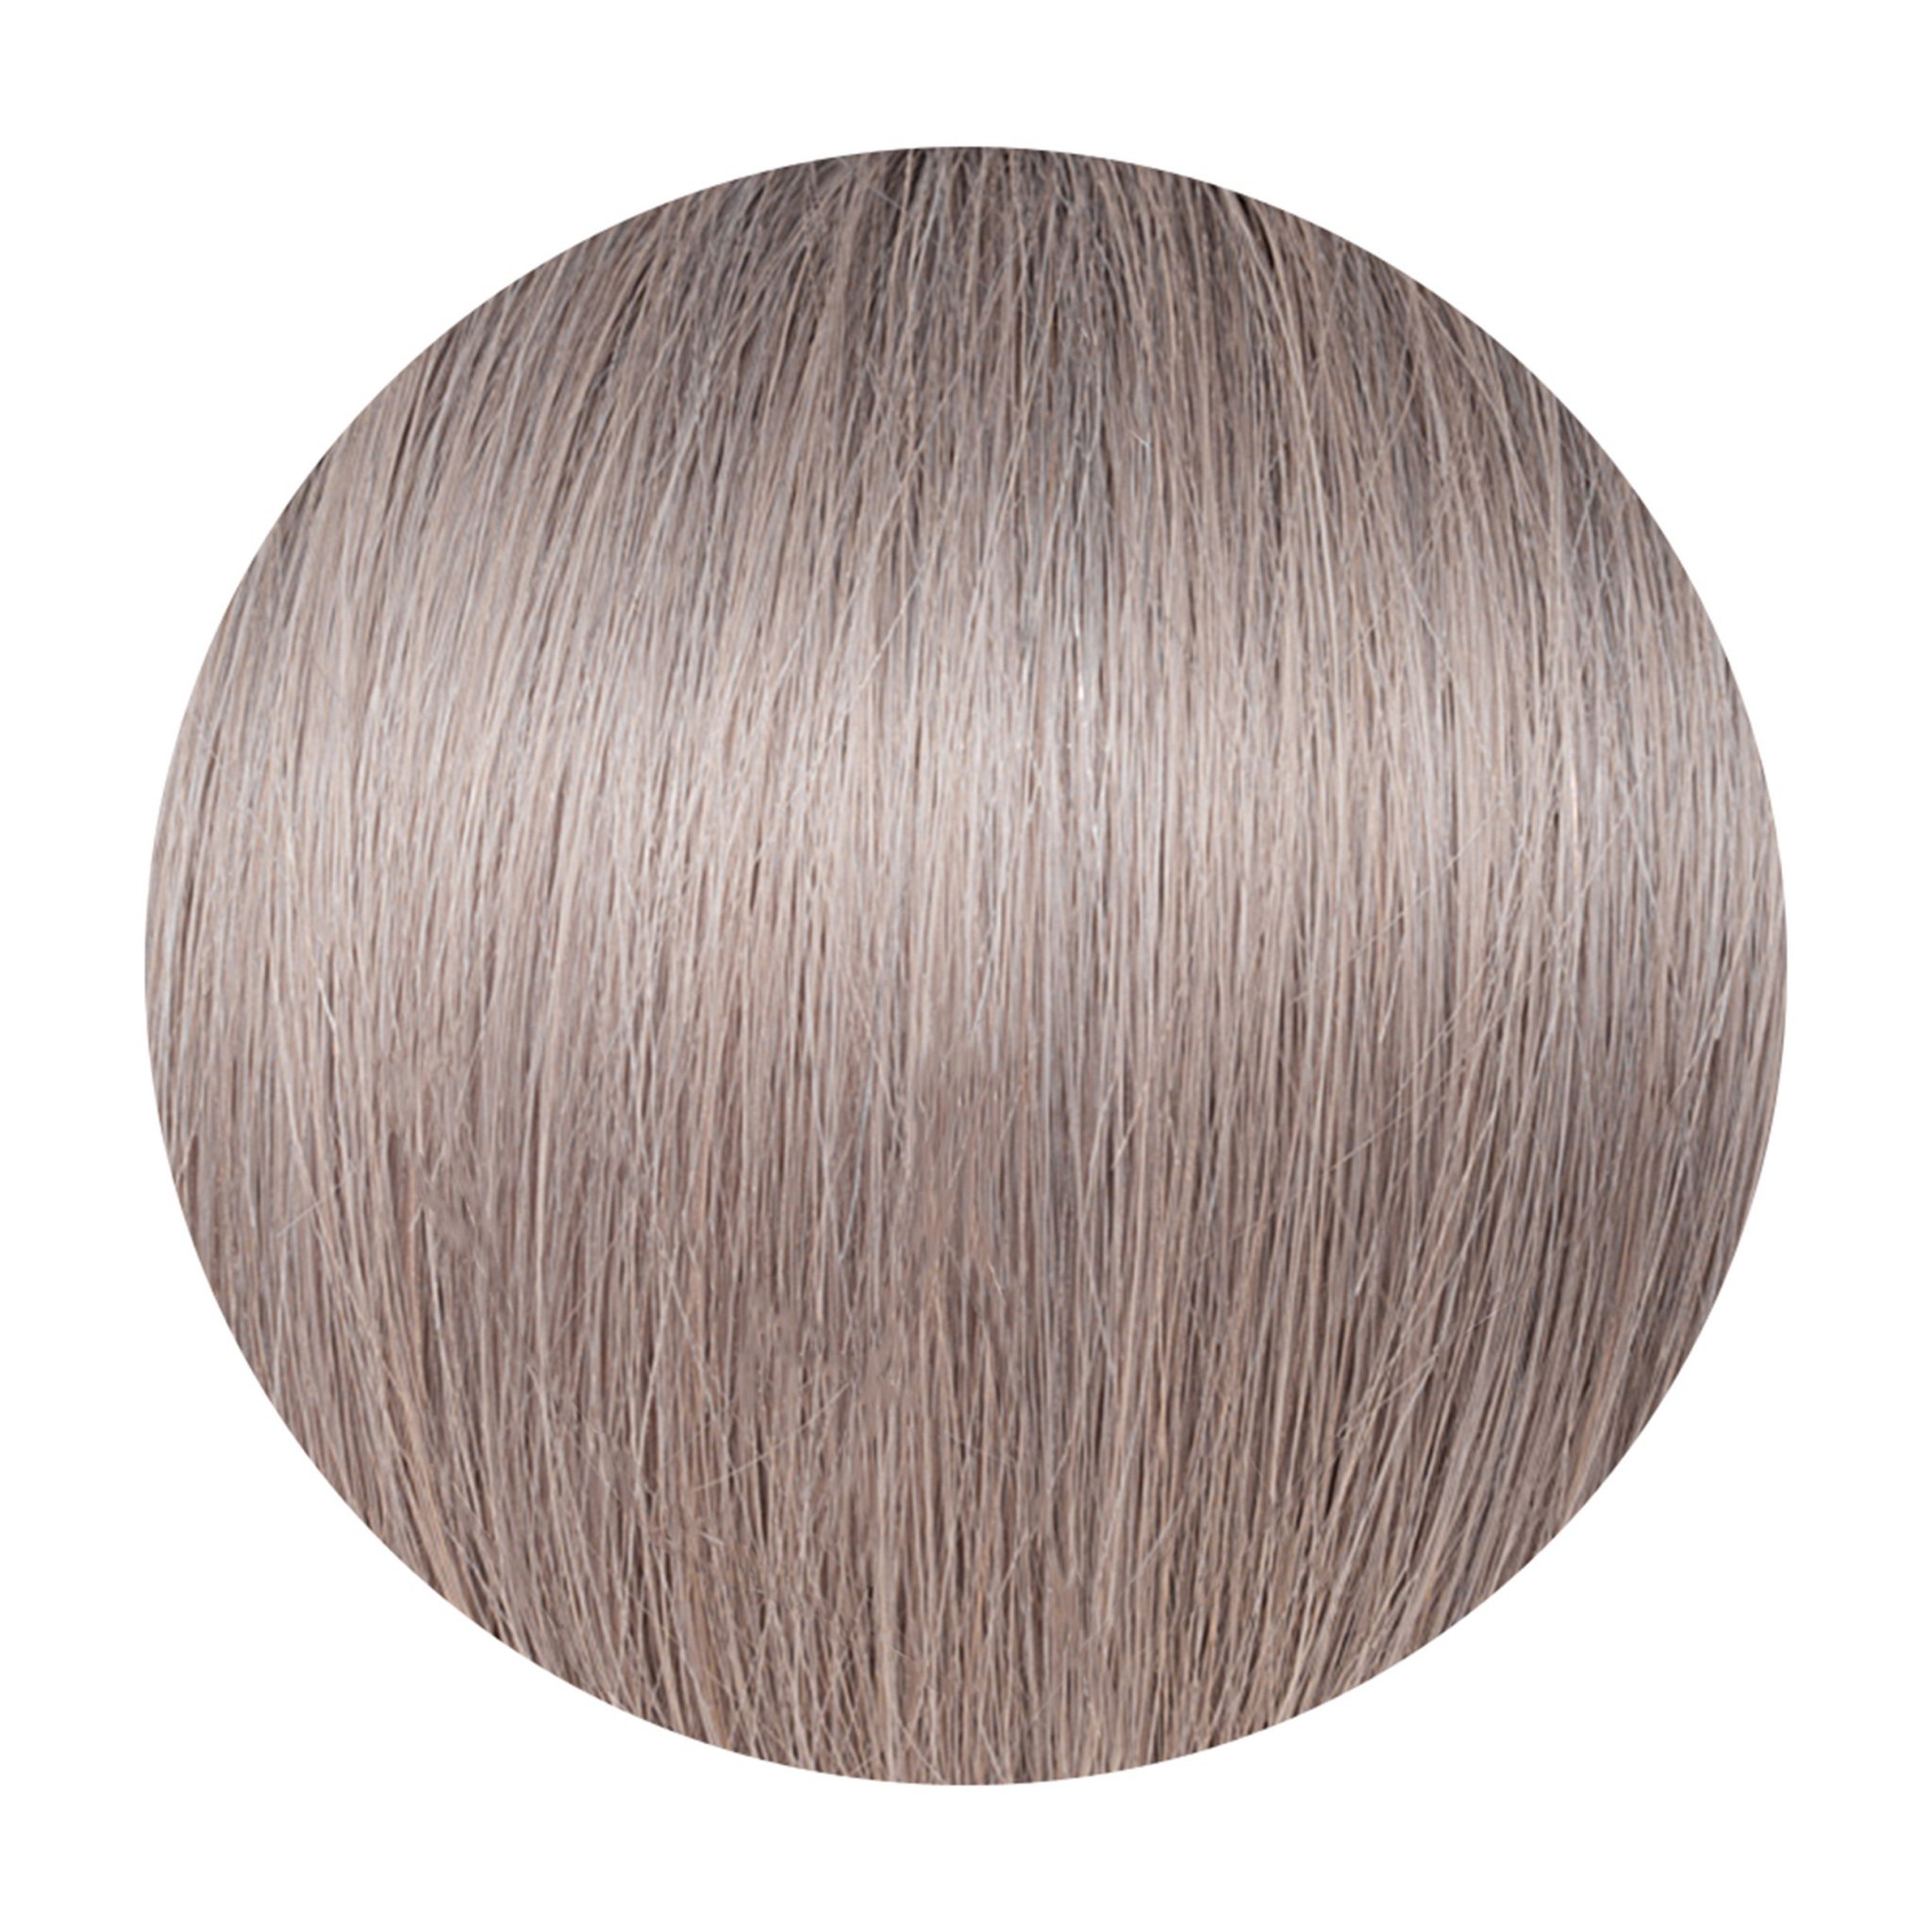 Milkyway Balayage Colour I Tip 21 22 Inches Seamless1 Uk